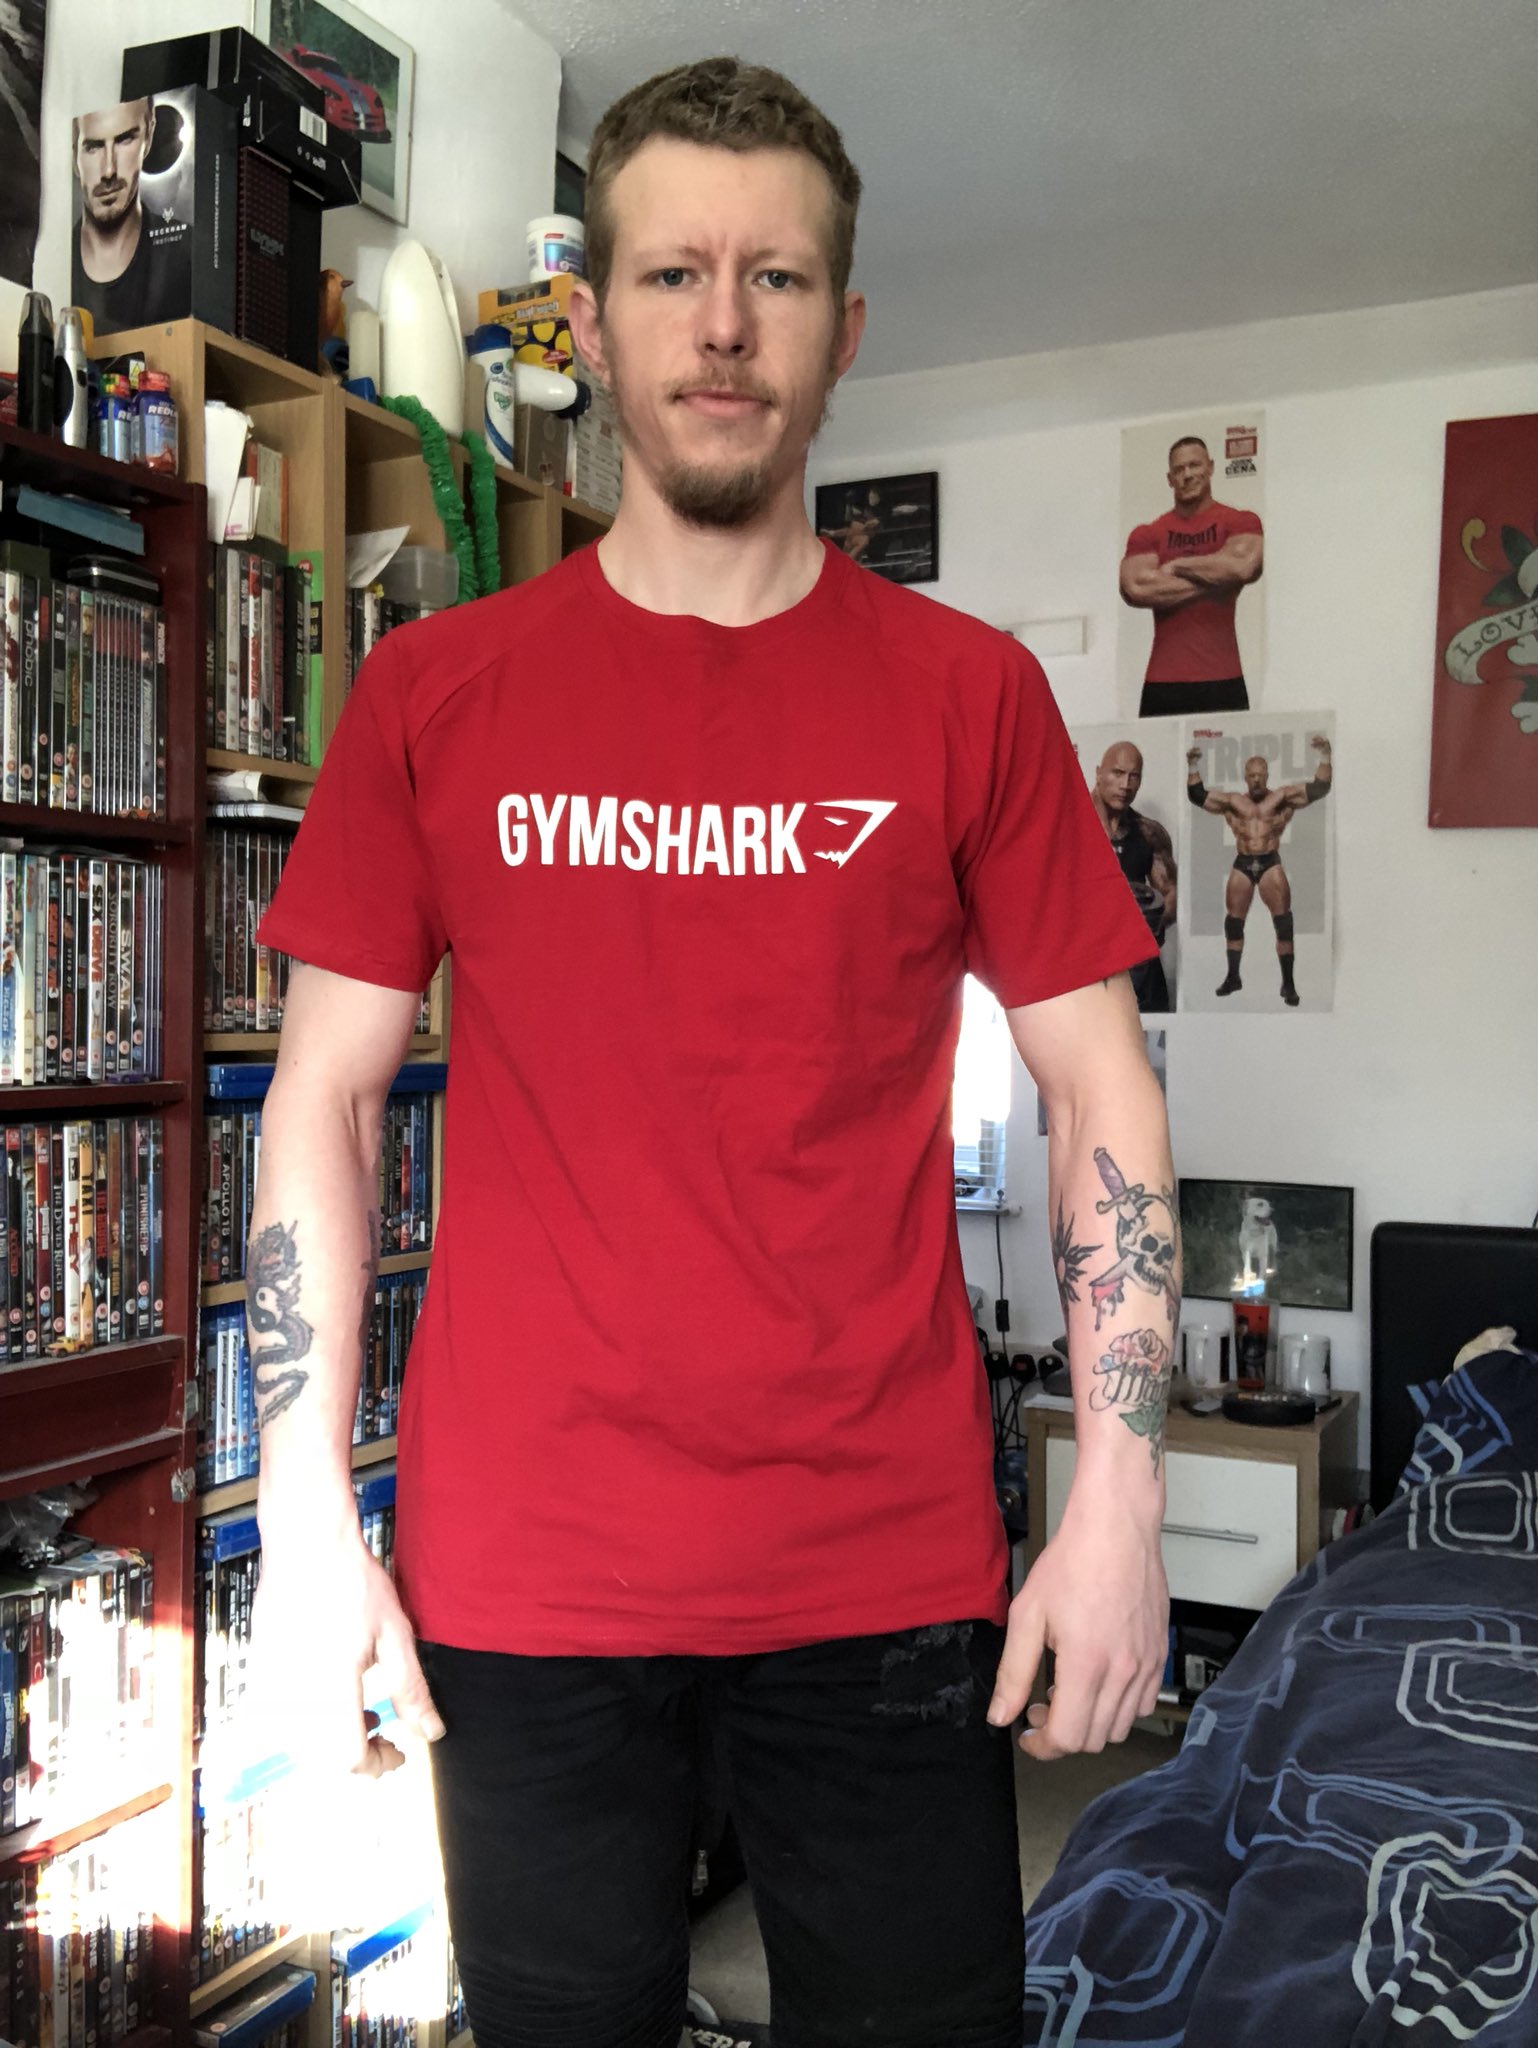 Martin Page on X: My new @Gymshark Apollo V2 t-shirt in deep red/white # gymshark #beavisionary  / X